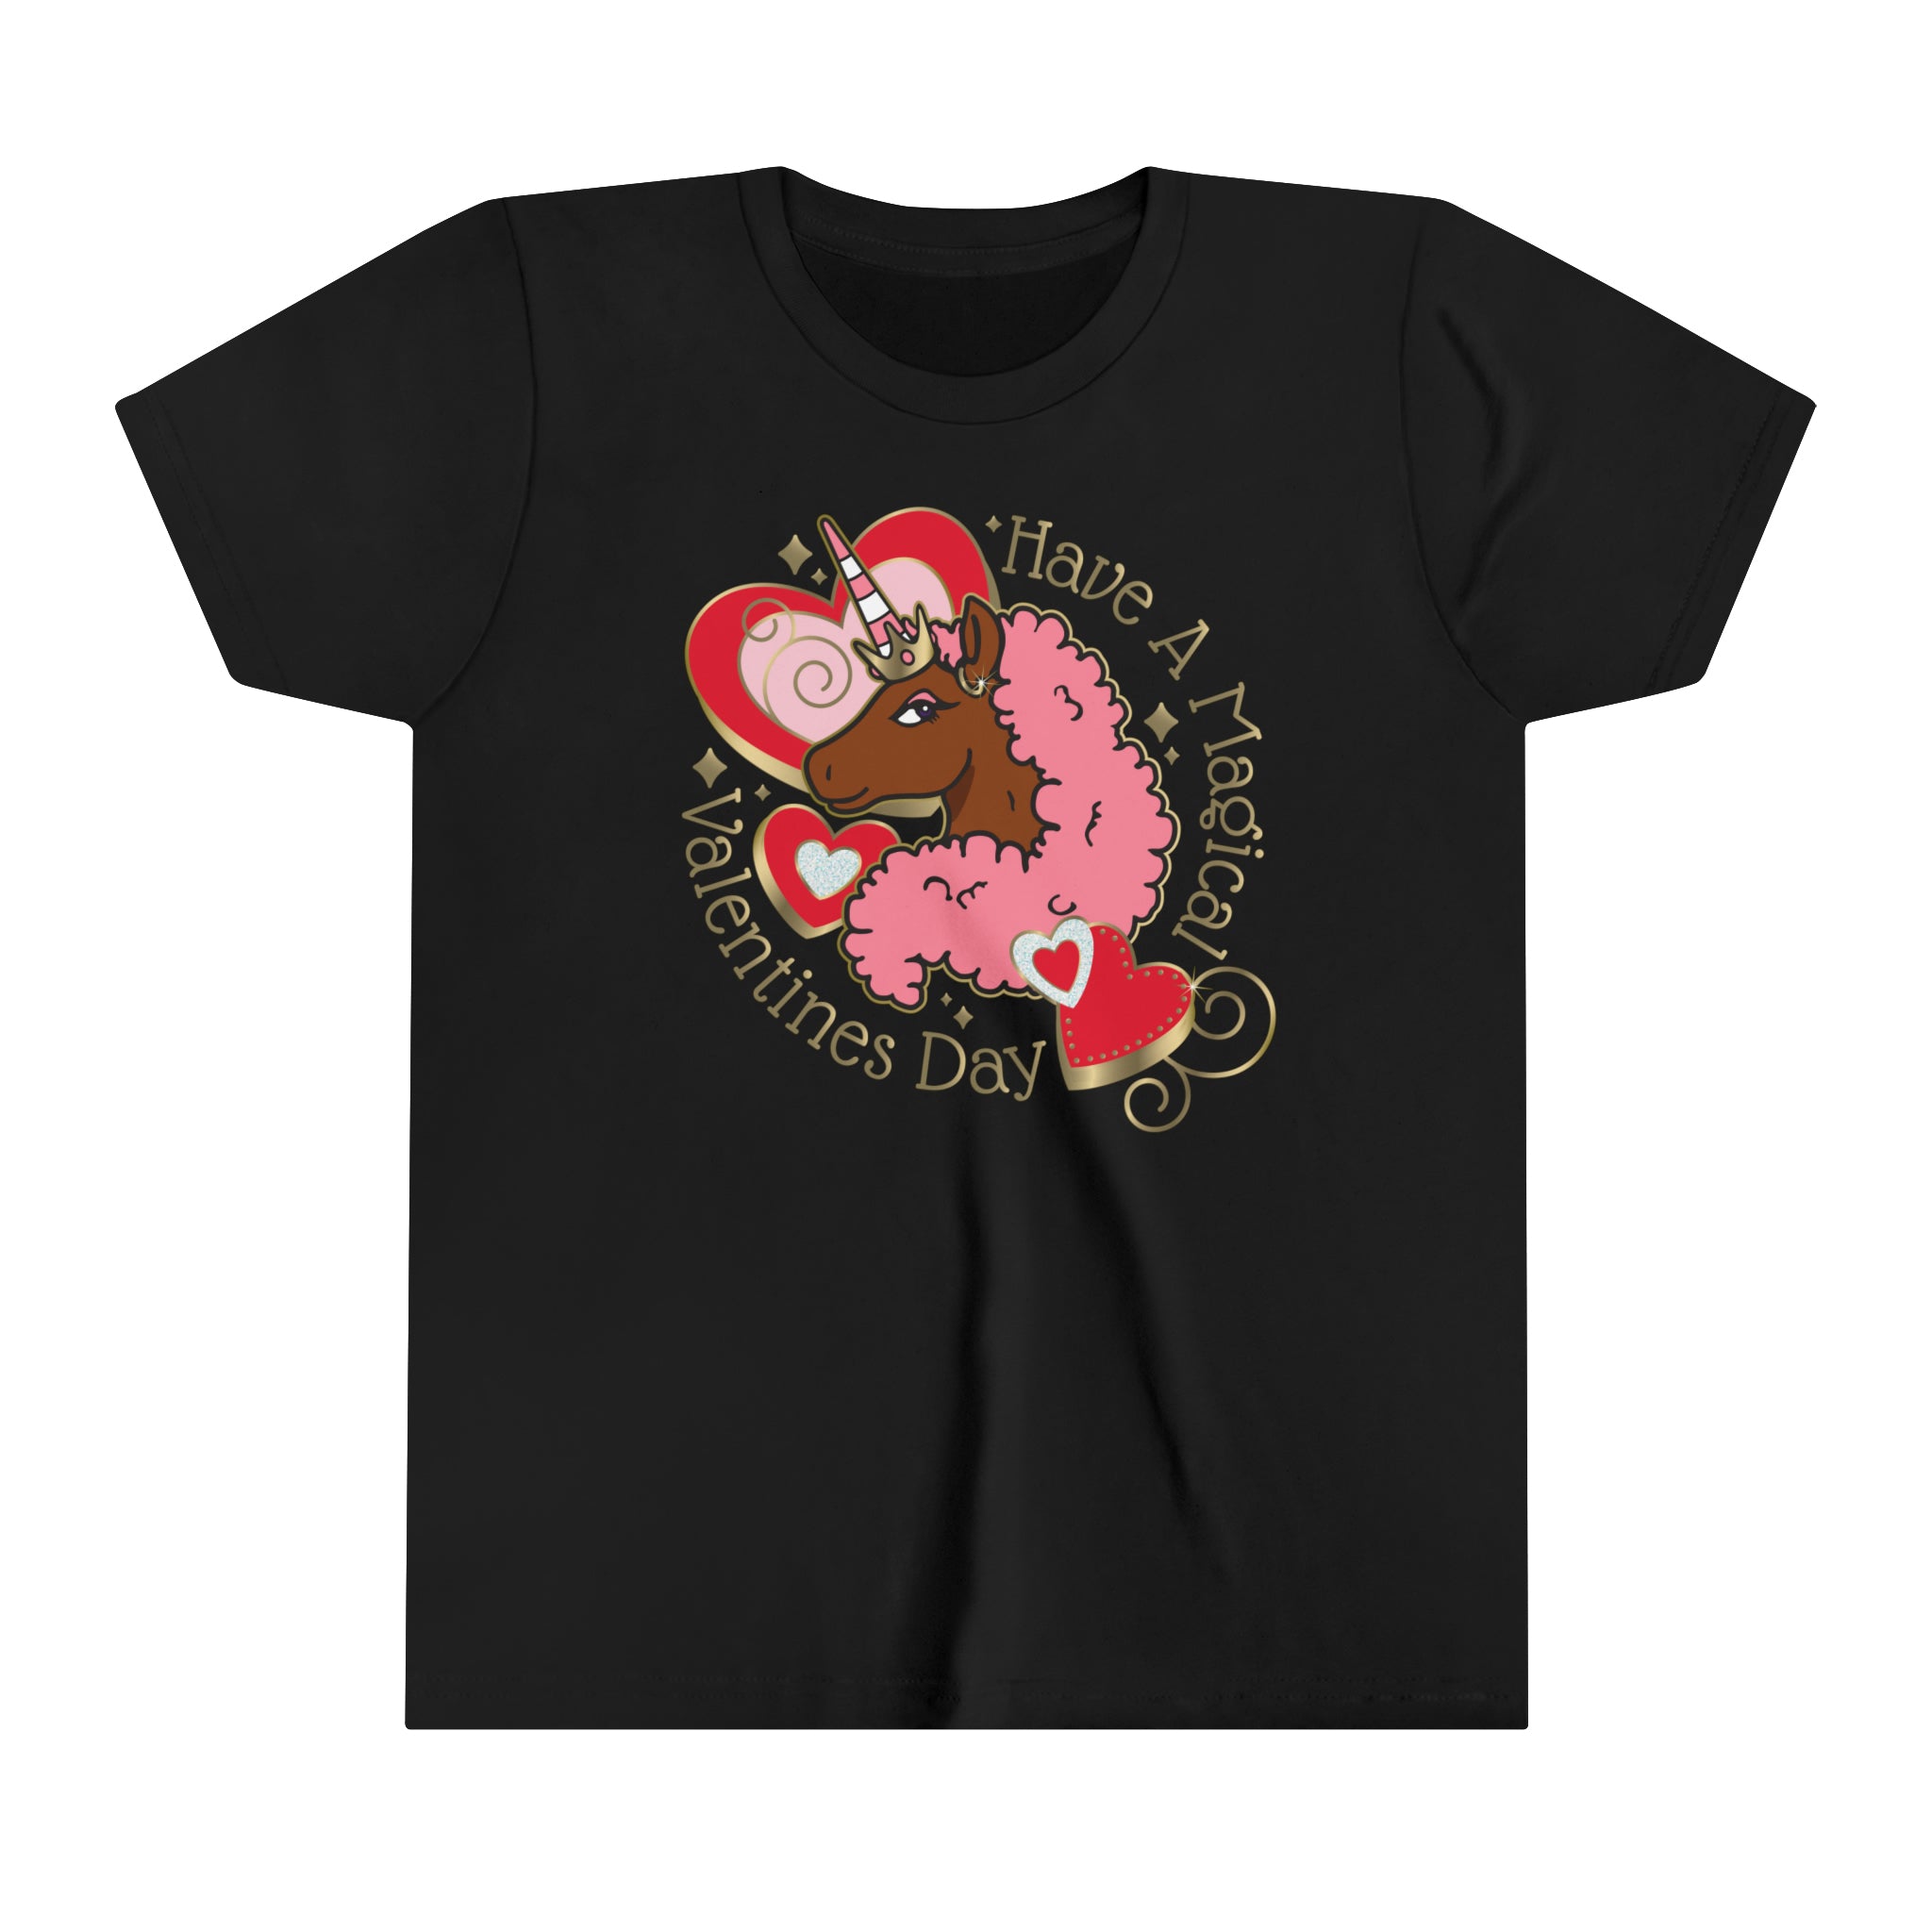 Afro Unicorn "Magical Valentine's Day" Youth Tee